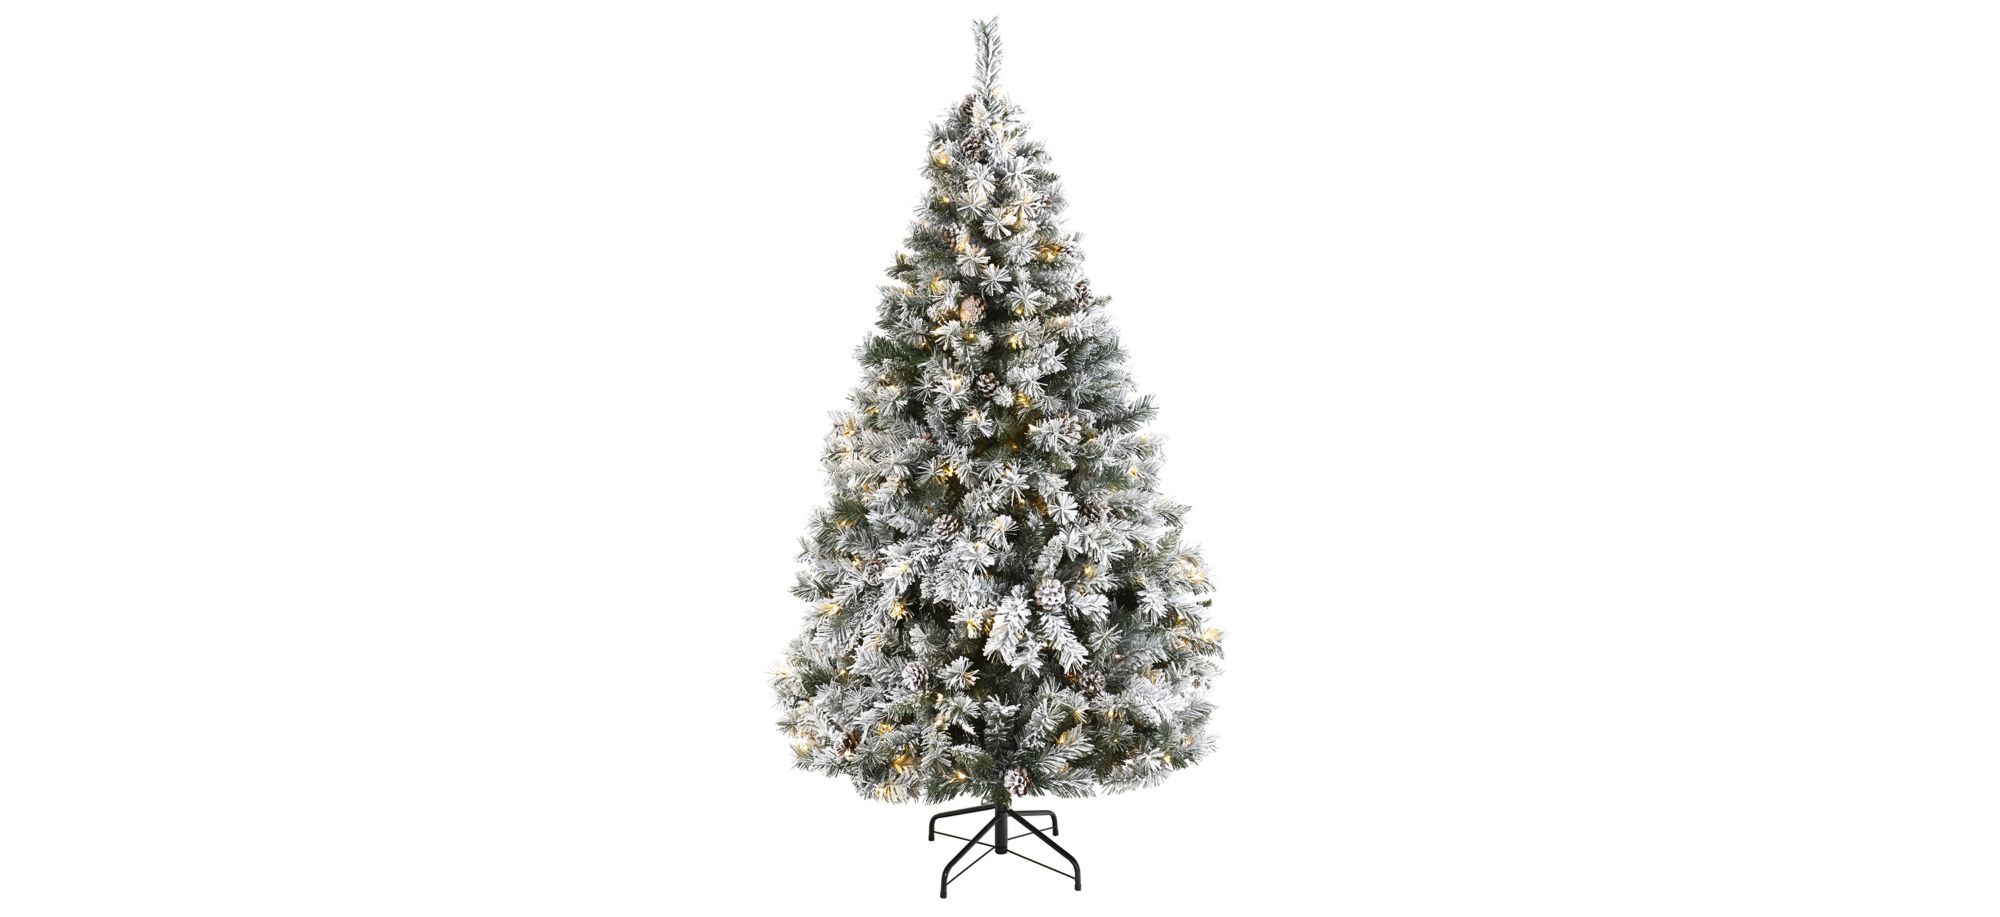 6ft. Pre-Lit Flocked White River Mountain Pine Artificial Christmas Tree in Green by Bellanest